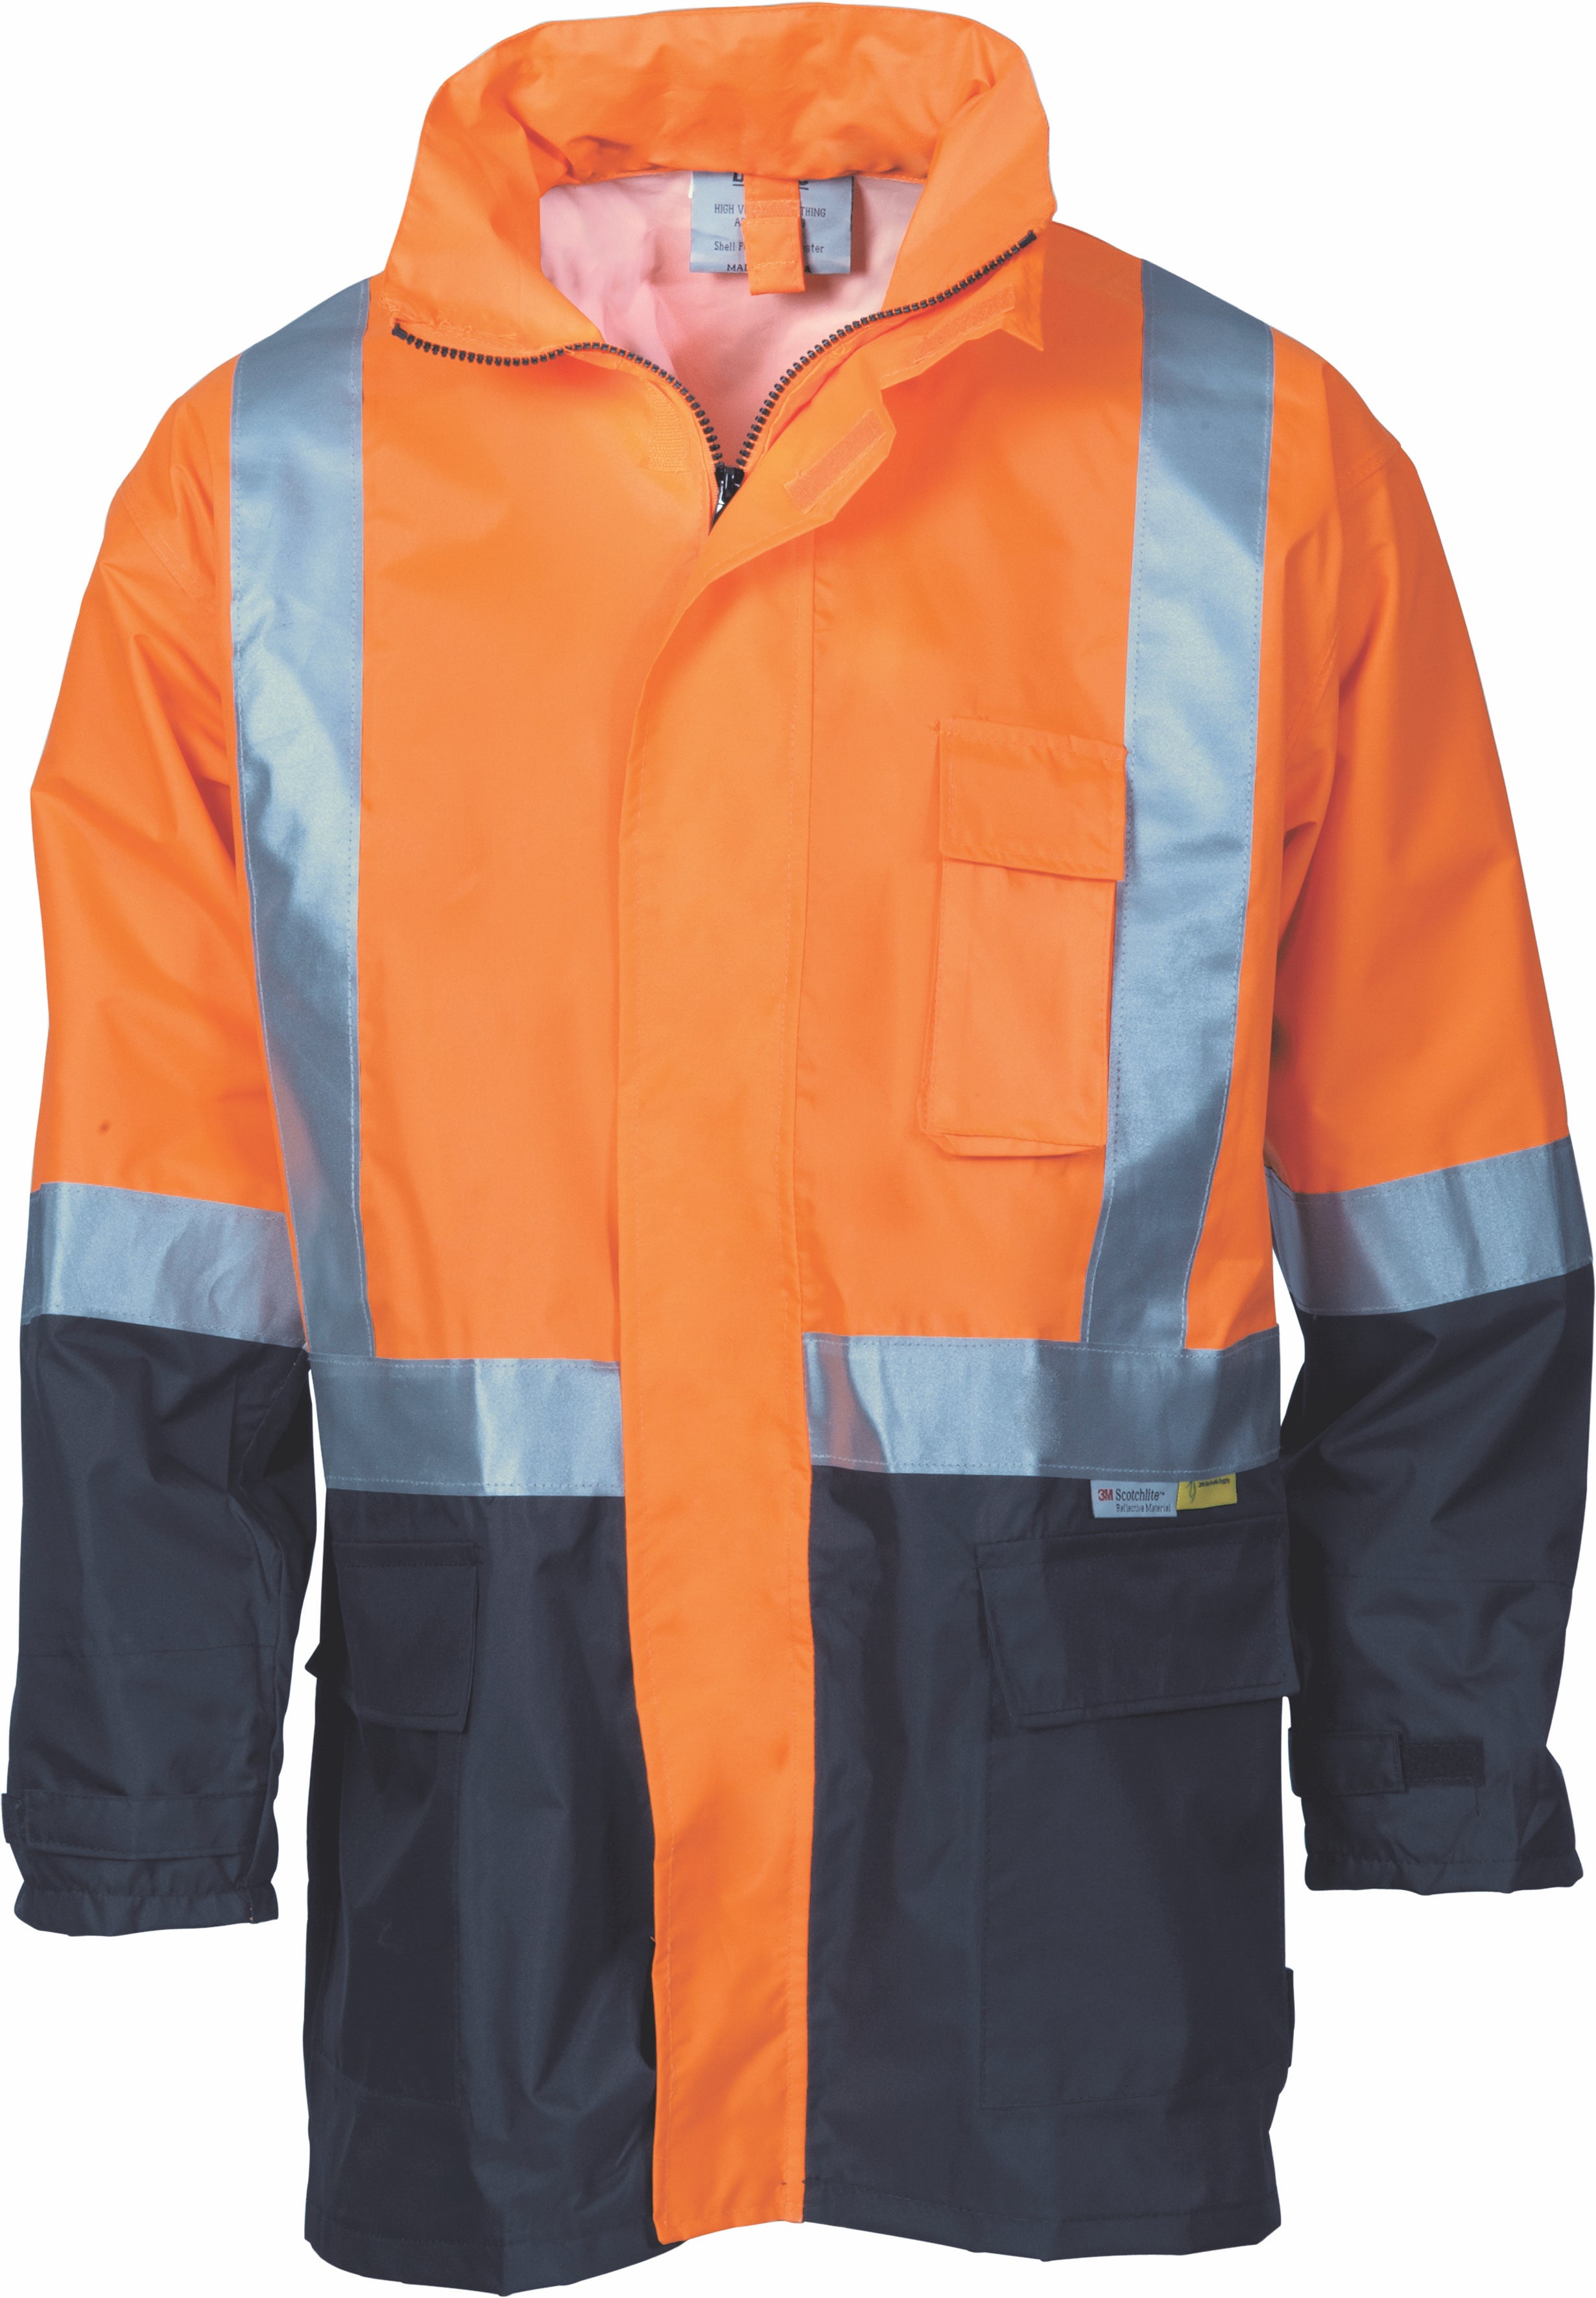 DNC - 3879  Hi Vis Two Tone Light Weight Rain Jacket with 3M Tape